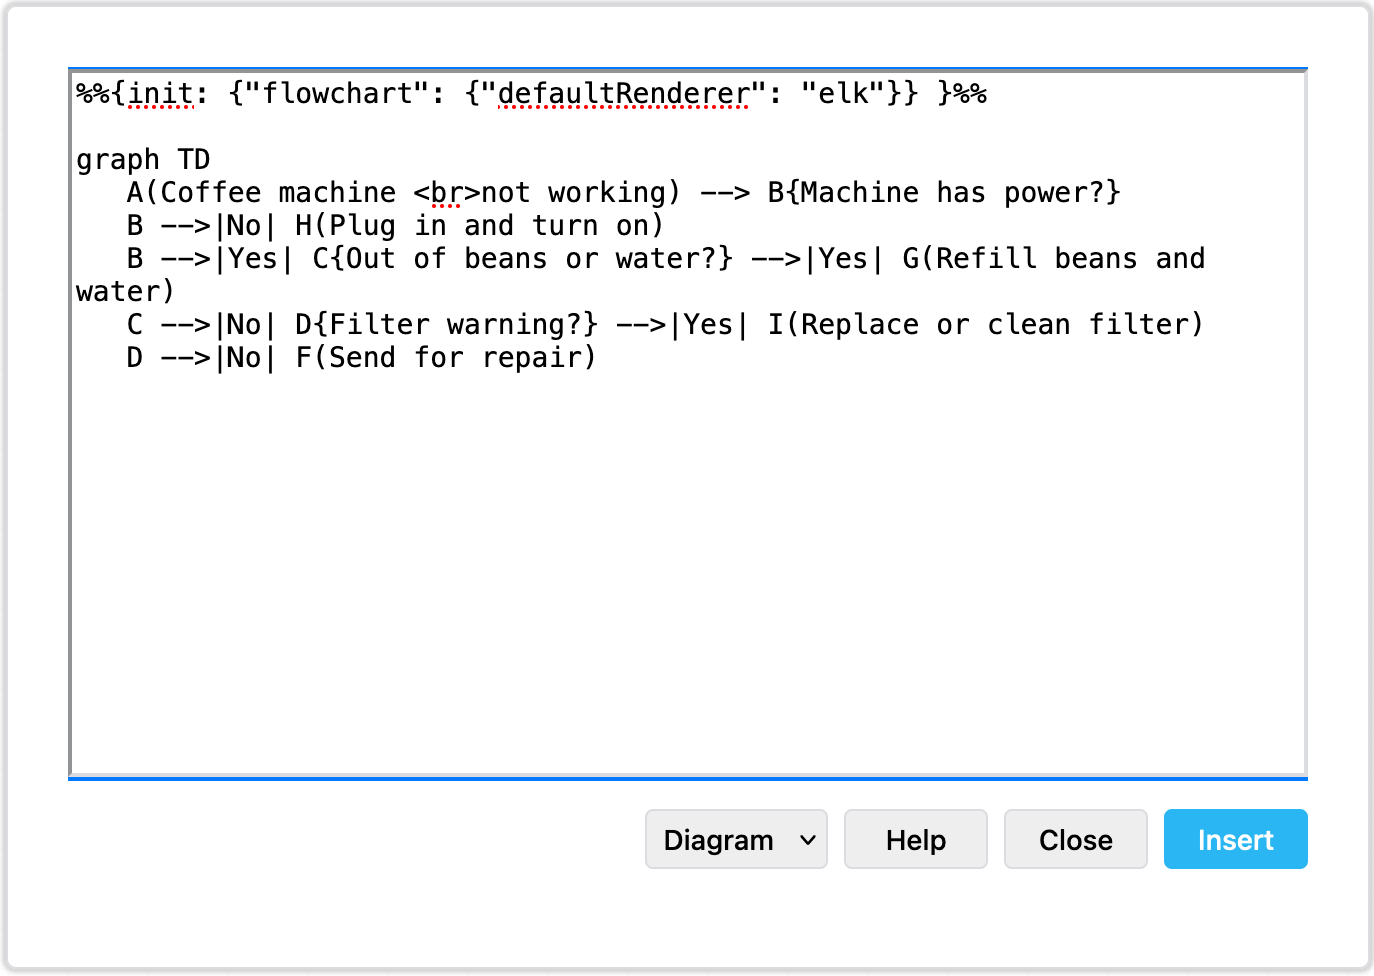 Tell the Mermaid diagram generation tool to use the ELK layout option in your text diagram description